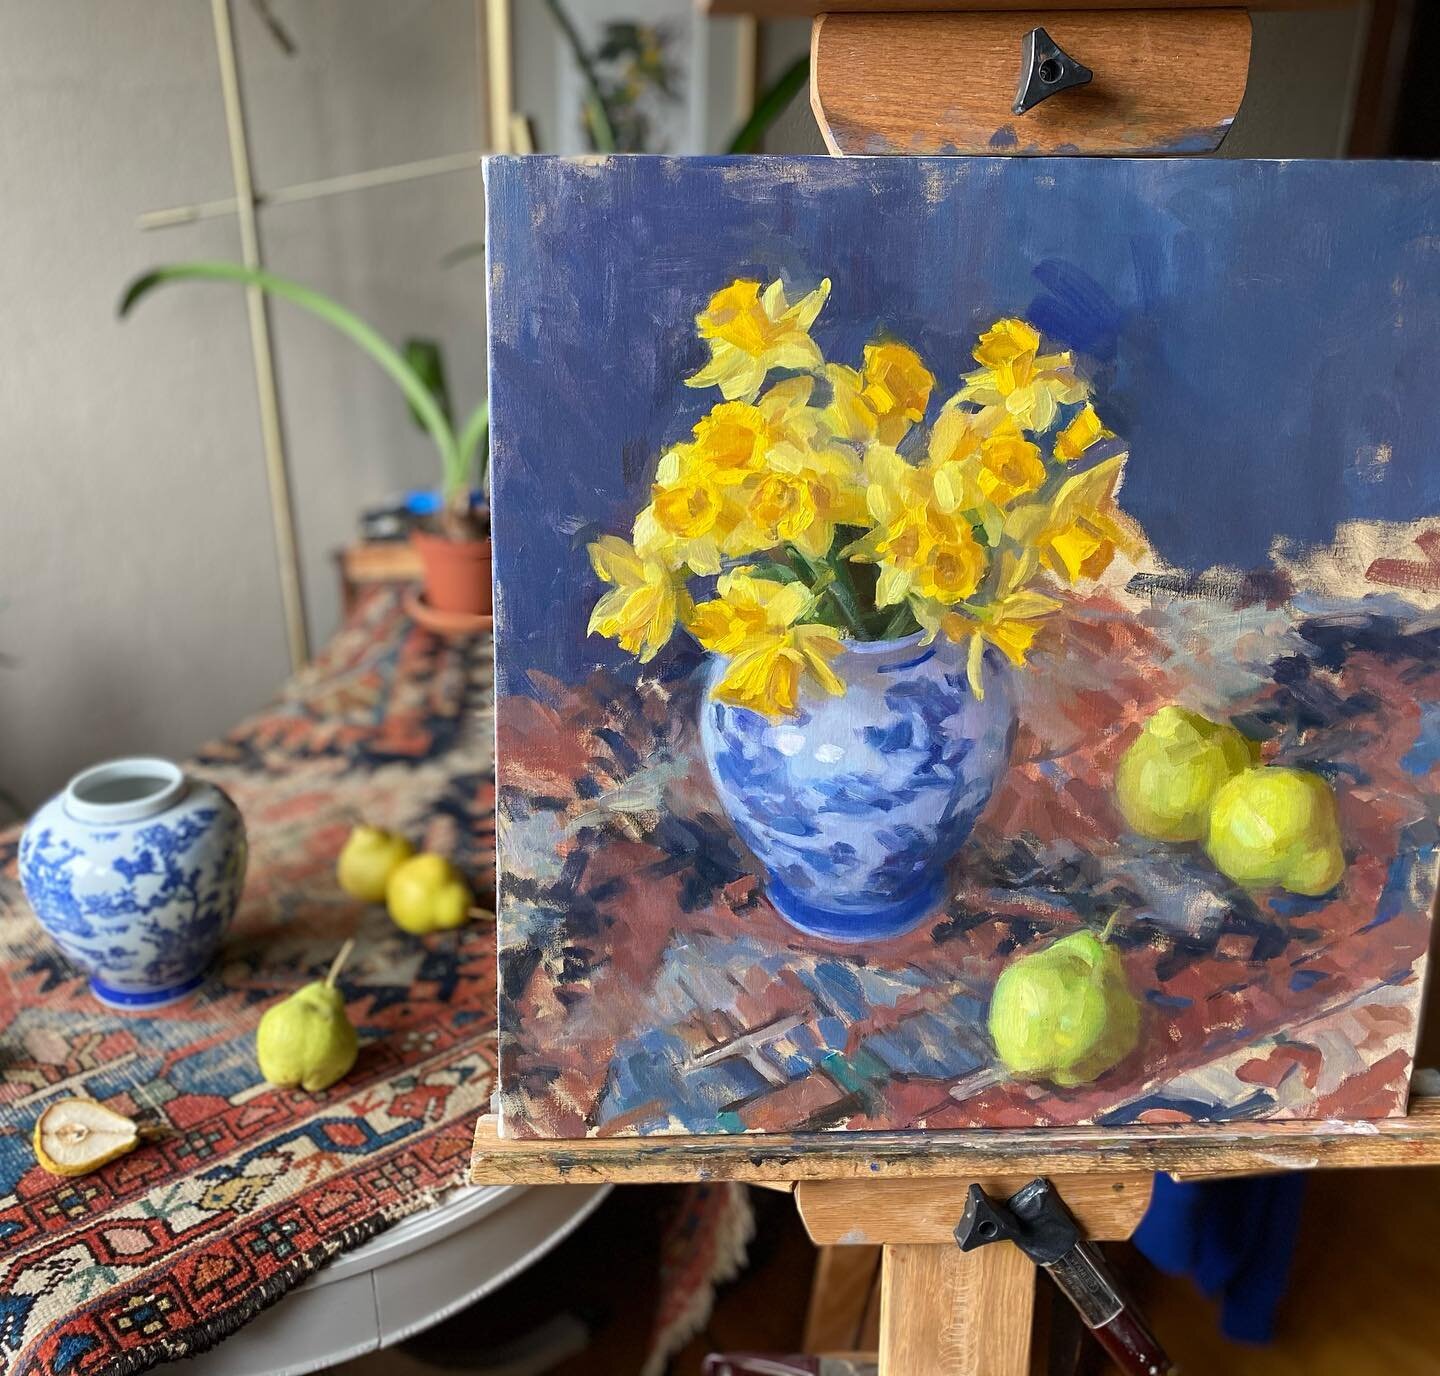 Enjoying pushing some paint and patterns on this one.  It&rsquo;ll be part of my solo exhibition this summer at the Pearson Lakes Center in Okoboji, opening July 15.

#daffodils #paintingfromlife #workinprogress #stilllifepainting #oilpainting